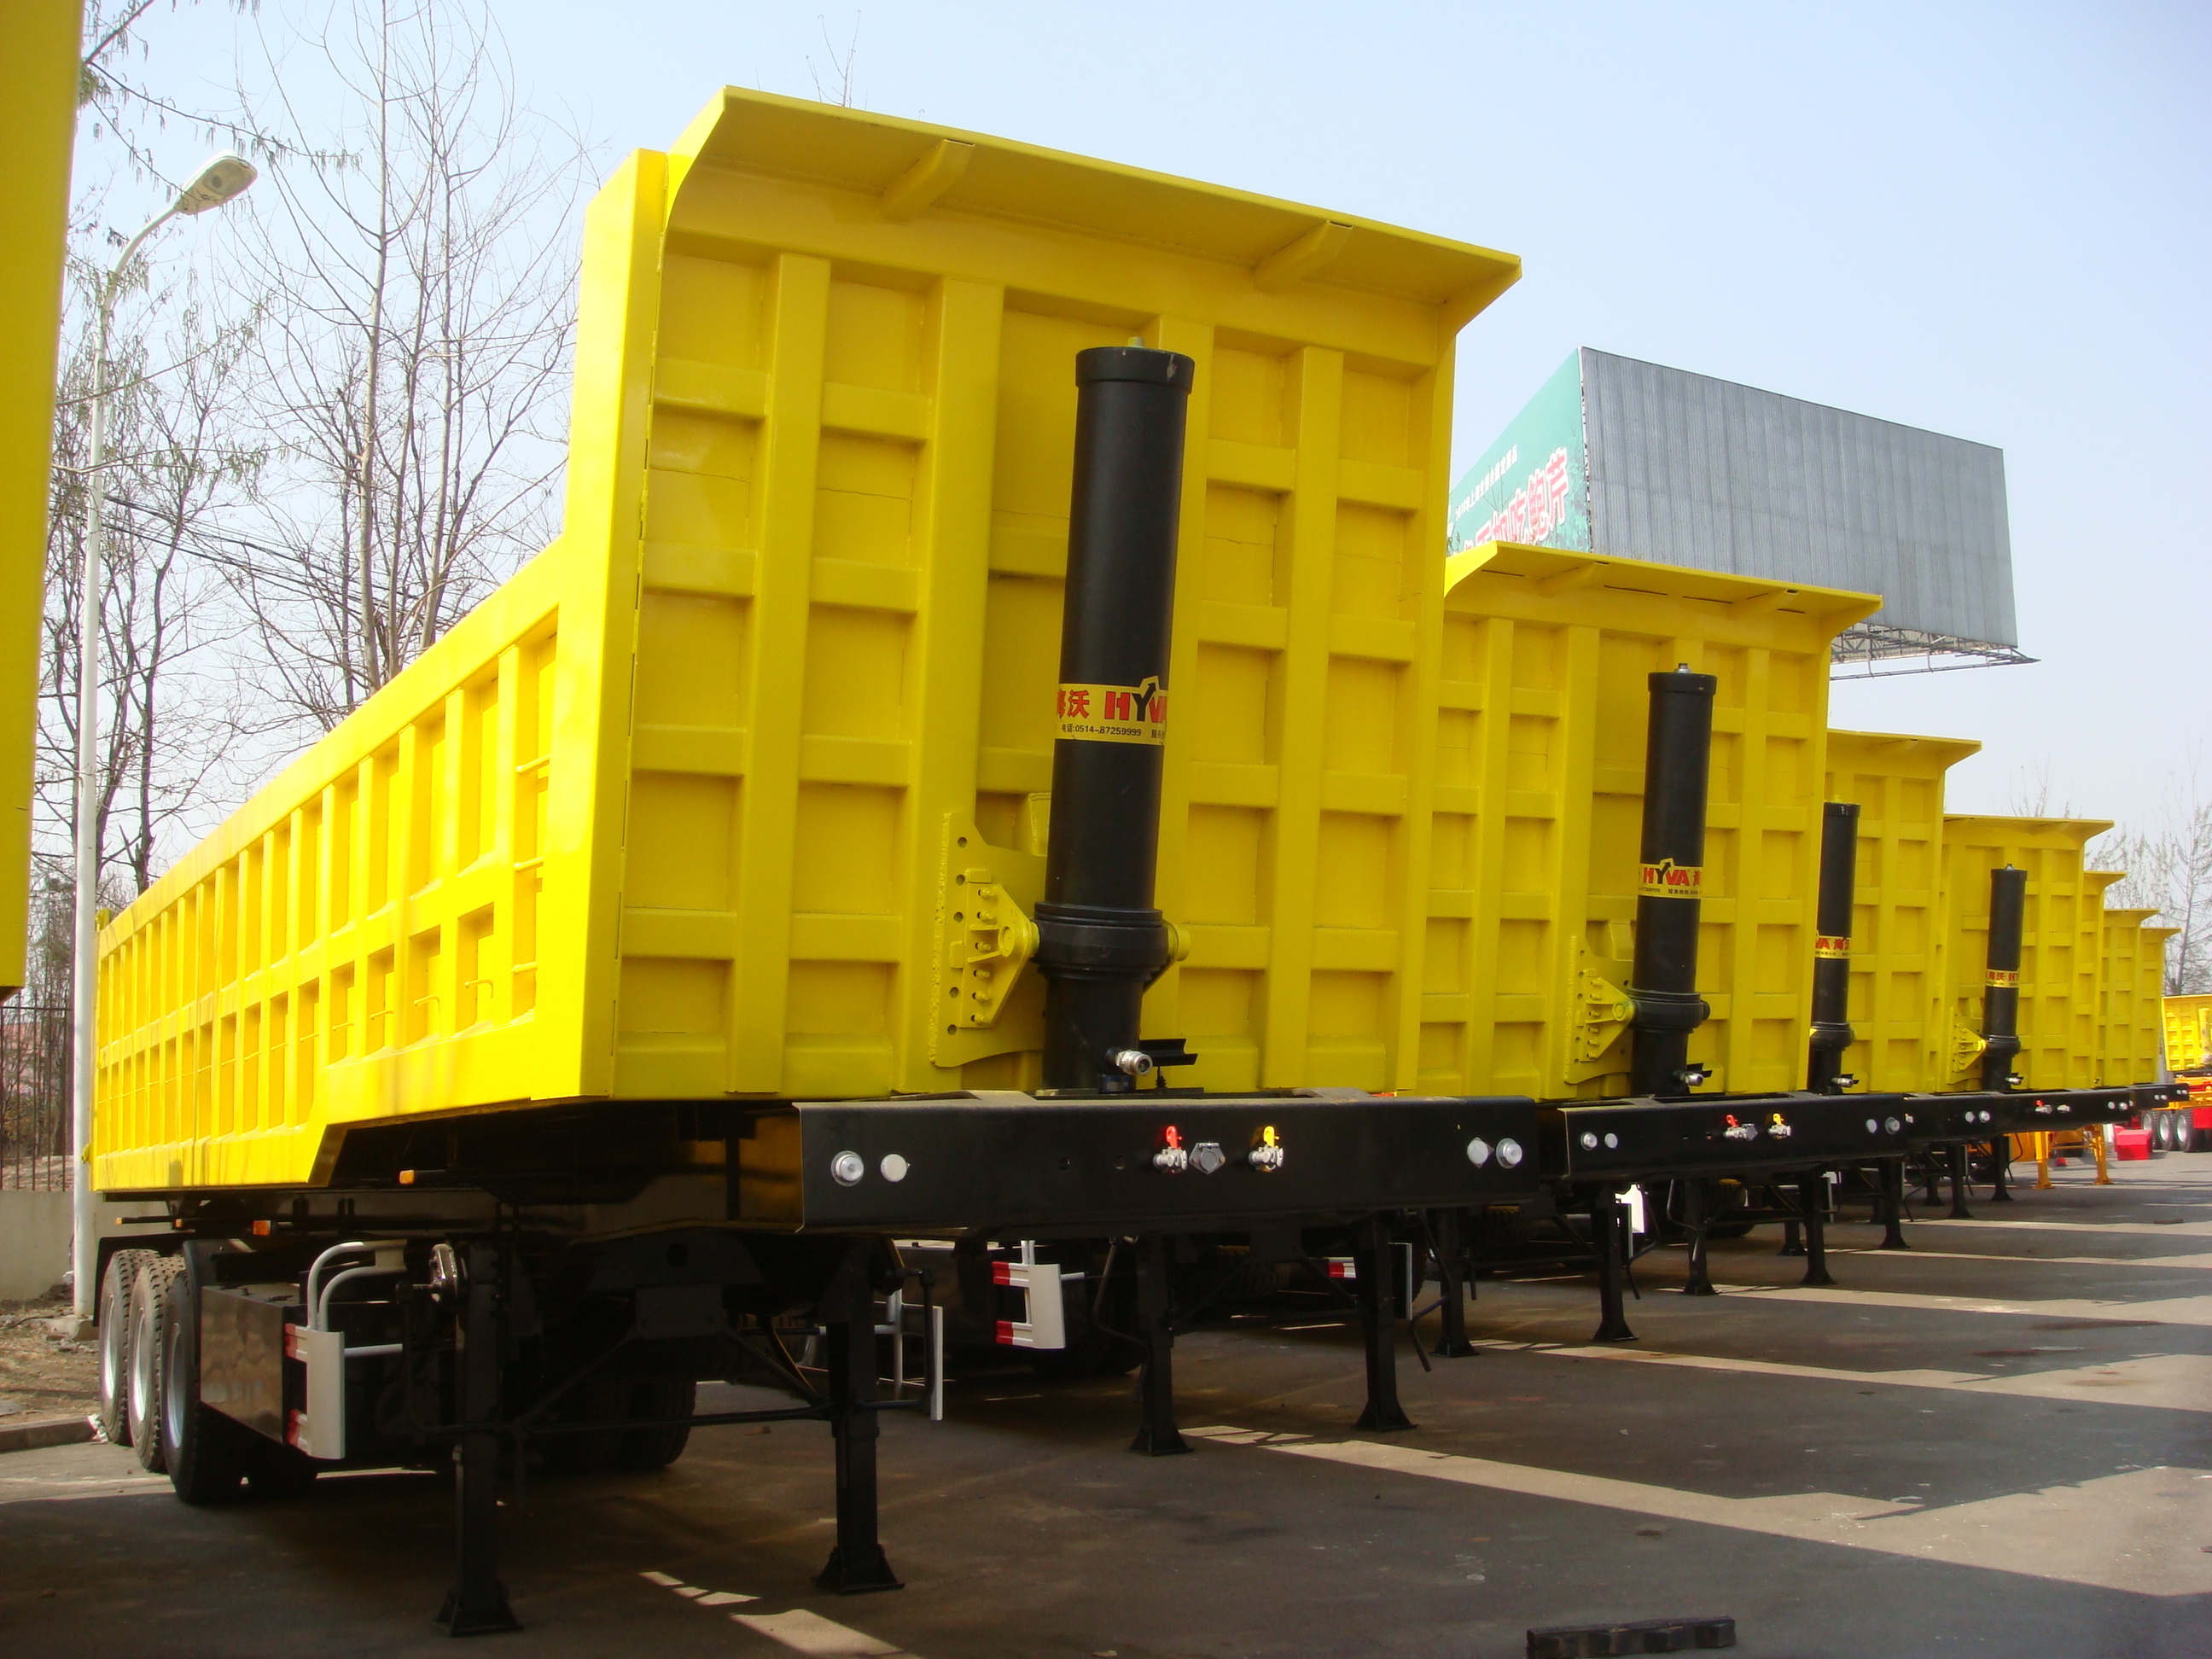 42 cbm Dump Semi-trailer with 3 BPW axles and hydraulic rear Discharge system for 80 Tons